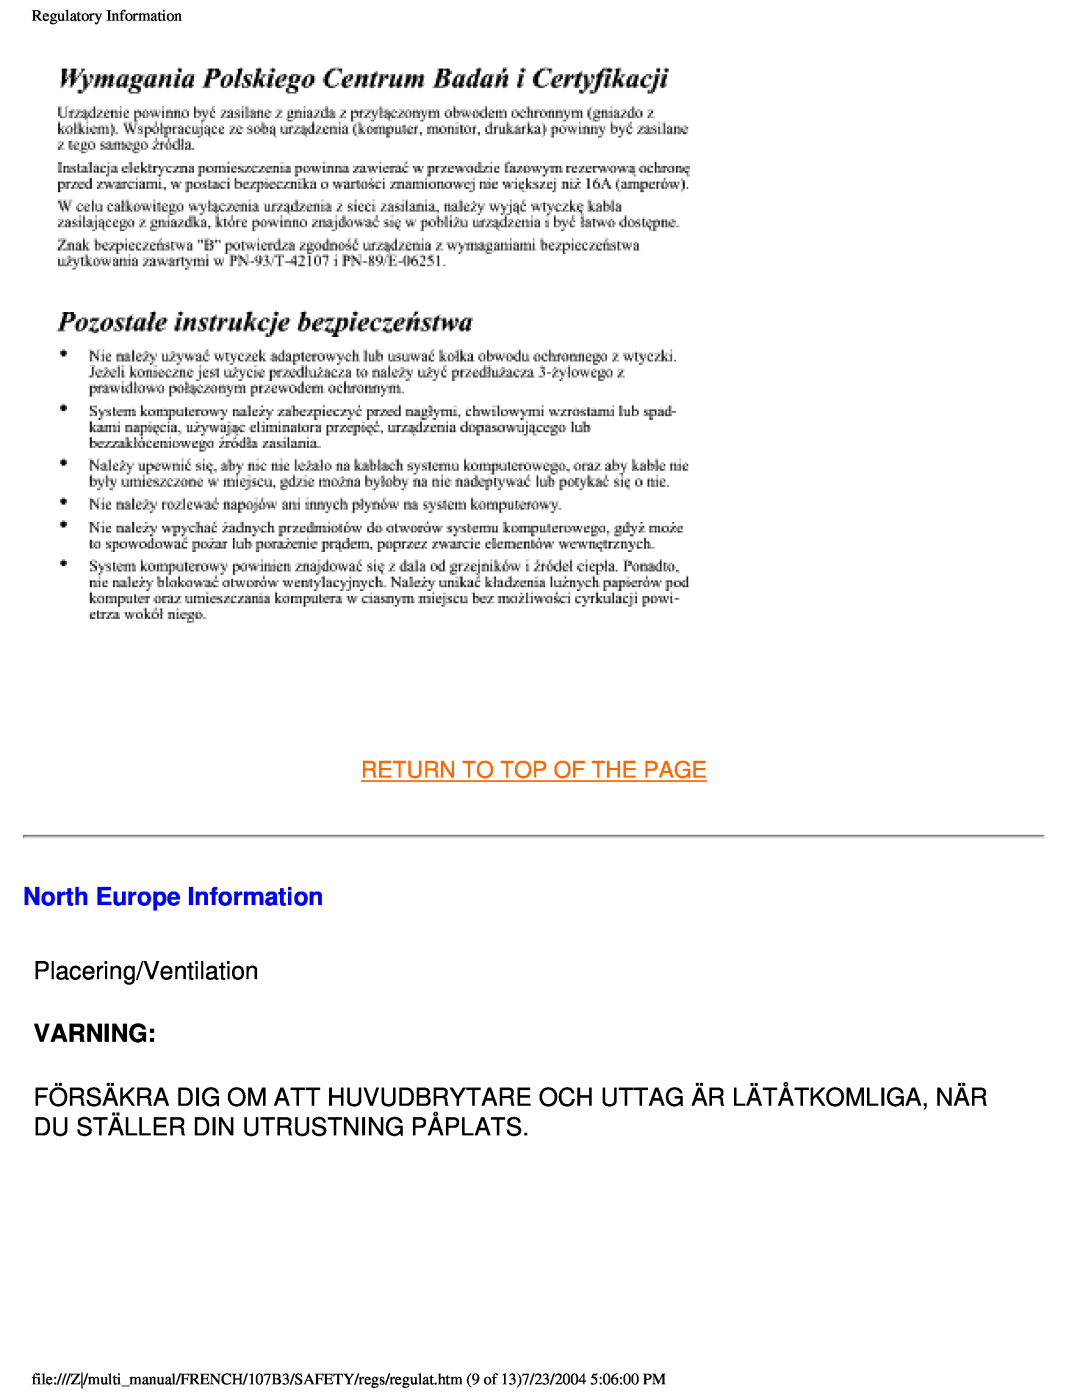 Philips 107B3 user manual North Europe Information, Varning, Return To Top Of The Page, Regulatory Information 